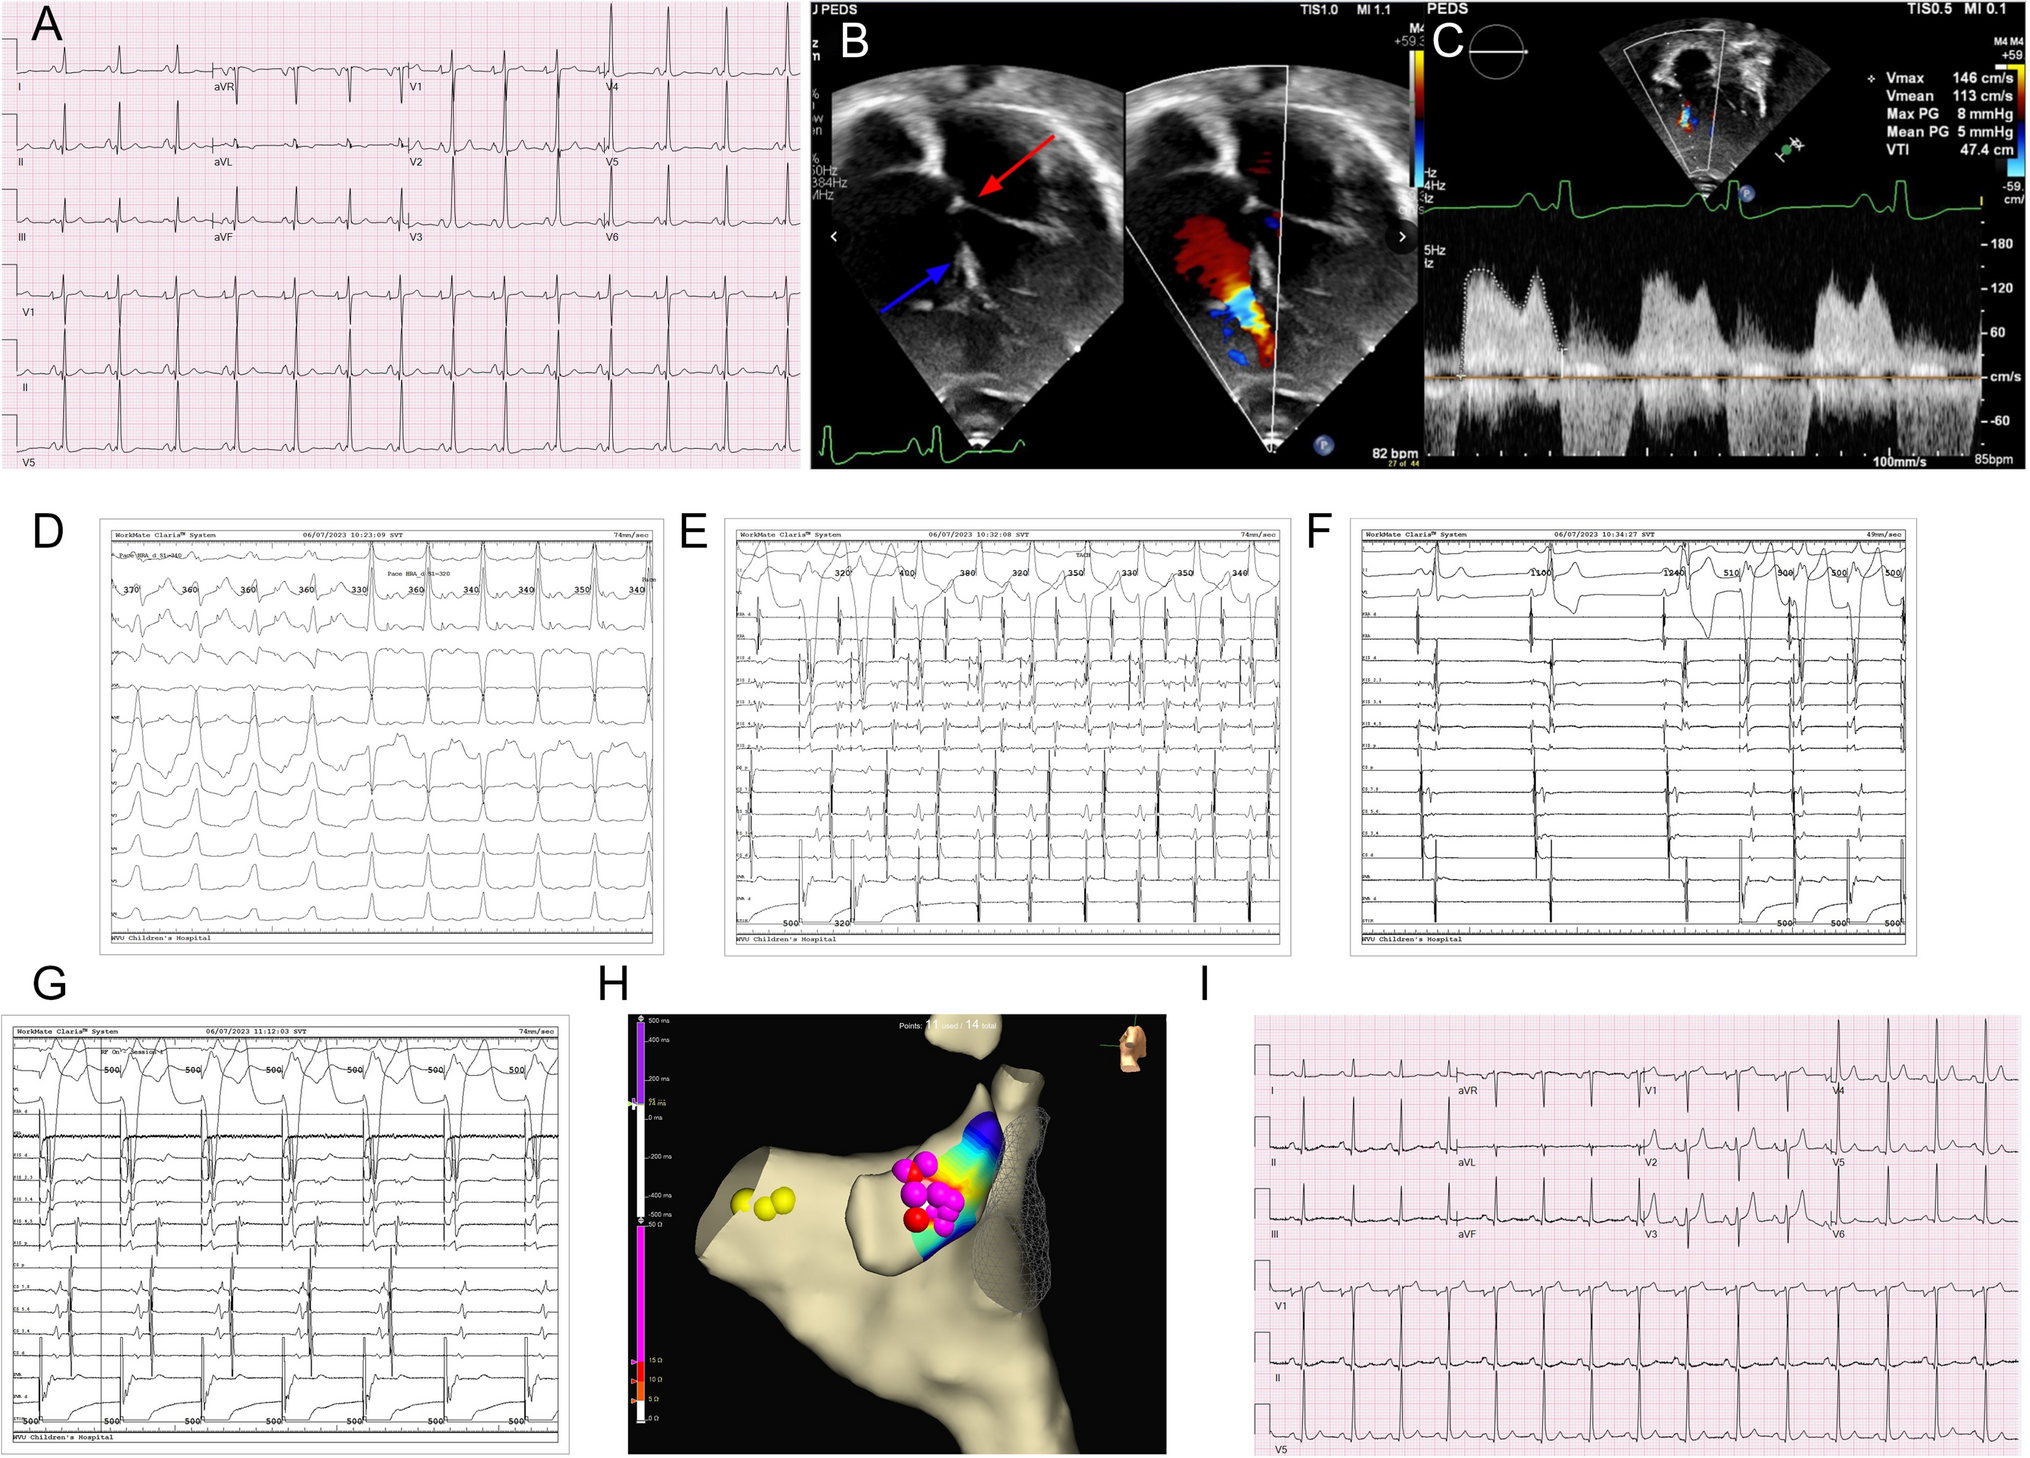 A rare presentation of Ebstein’s anomaly: left-sided accessory pathway and tricuspid stenosis